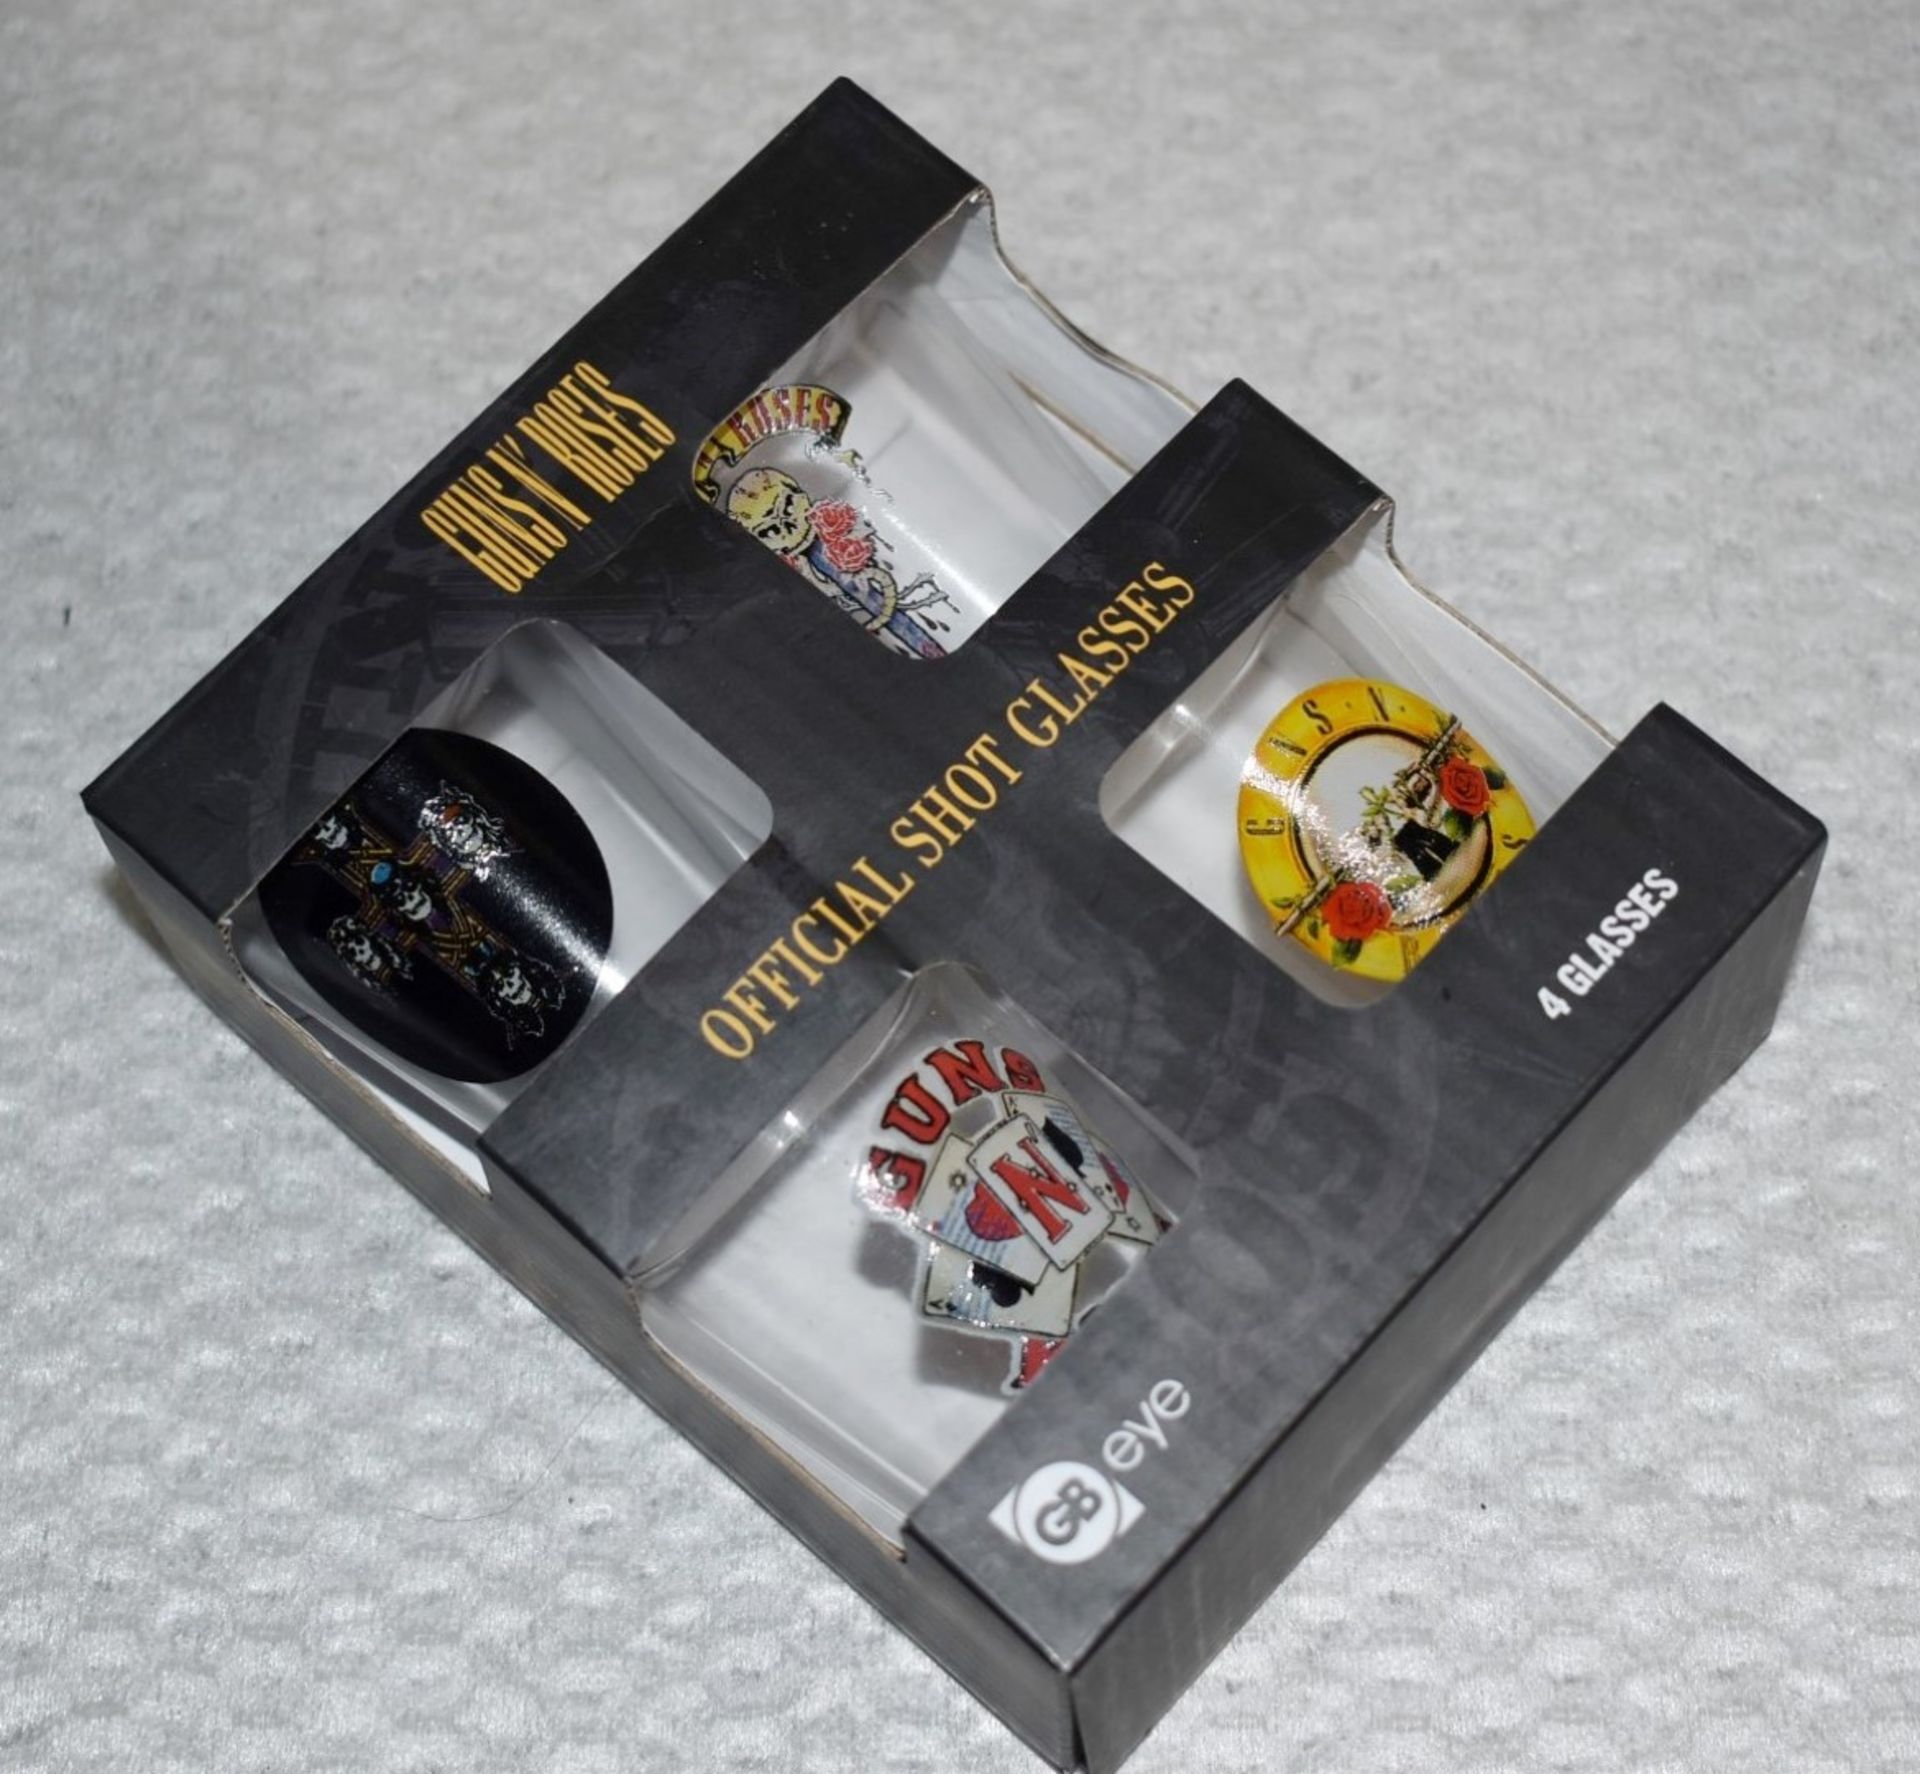 2 x Sets of Official Guns n Roses Shot Glass Gift Packs - Each Pack Contains 4 x 1oz Shot Glasses - - Image 4 of 5